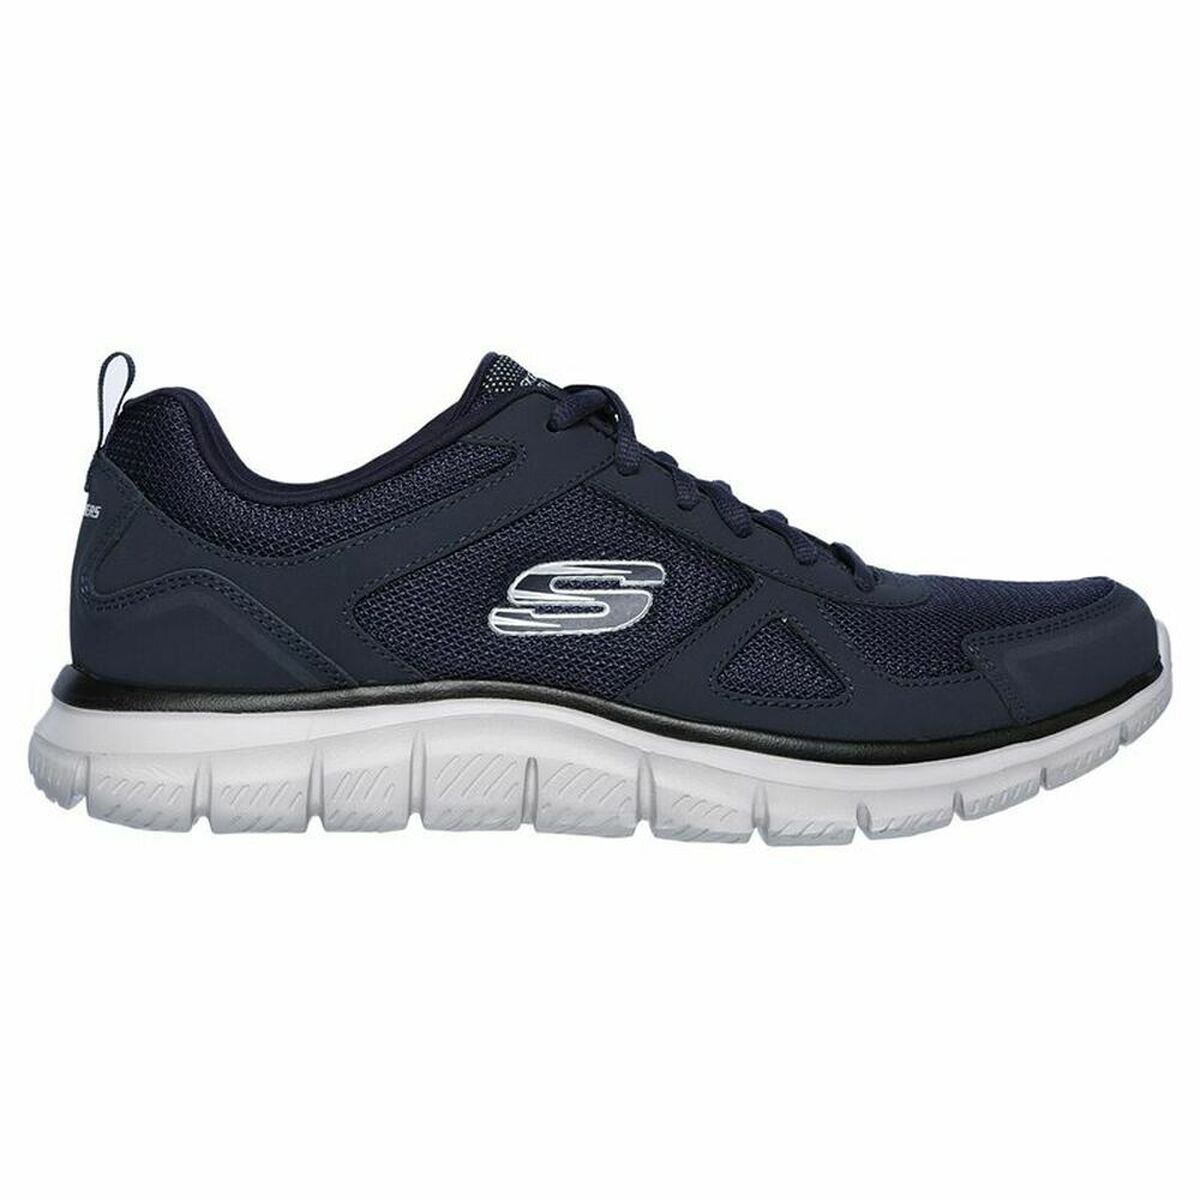 Ténis Casual Skechers Track - Sloric M